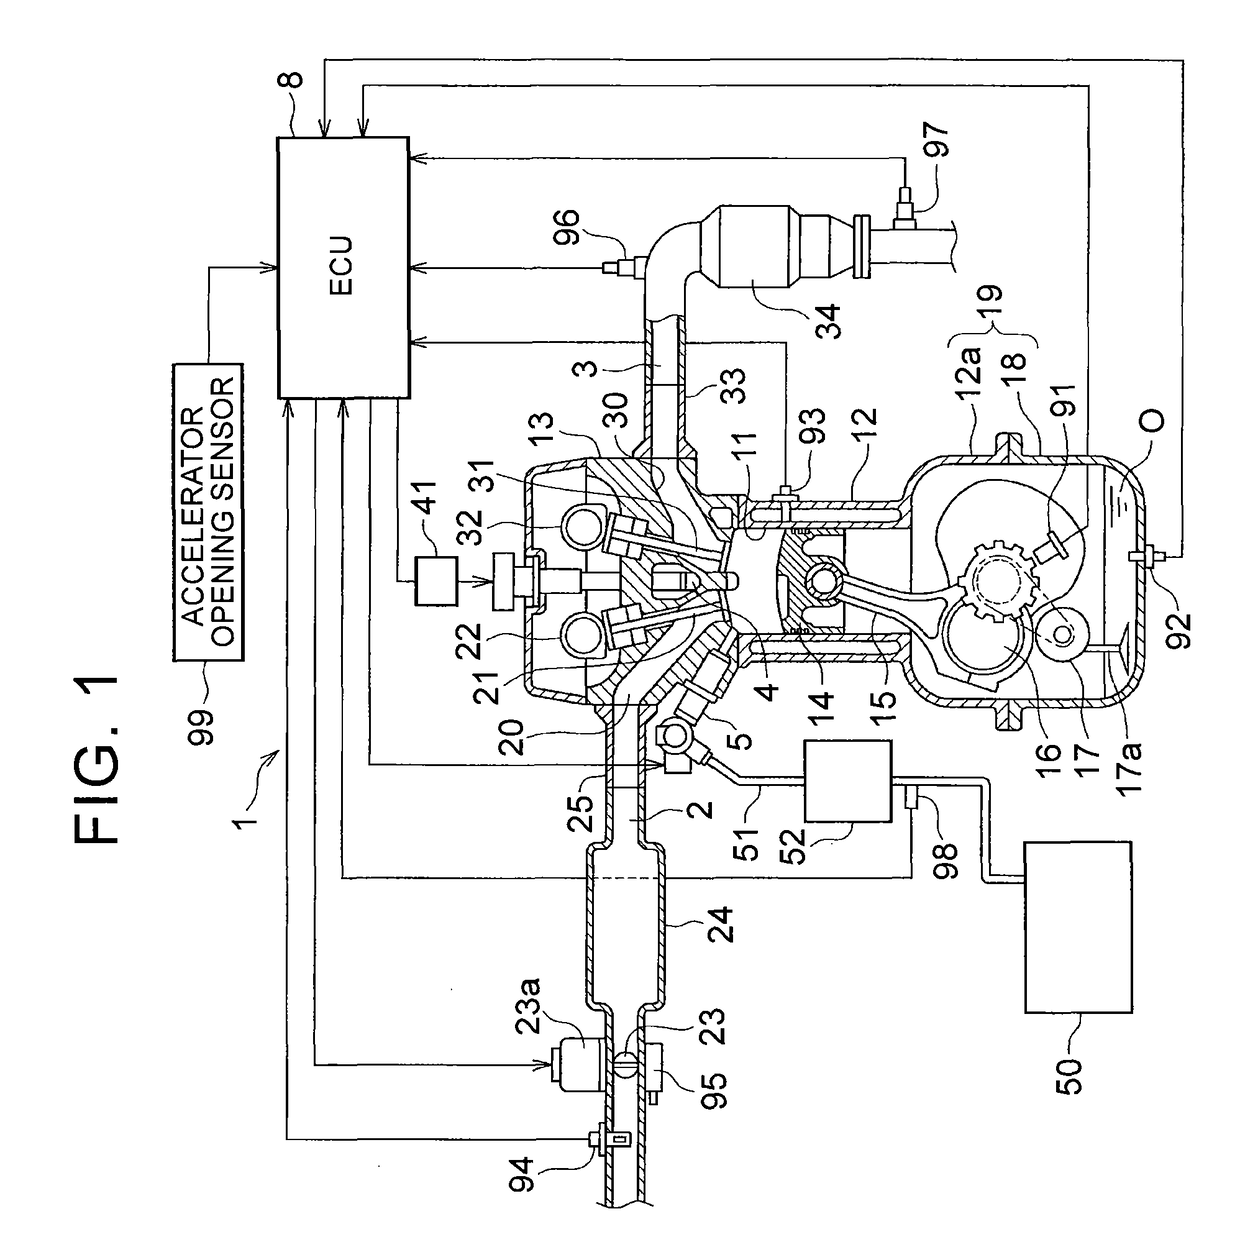 Oil dilution estimation and mitigation control in a fuel injected engine